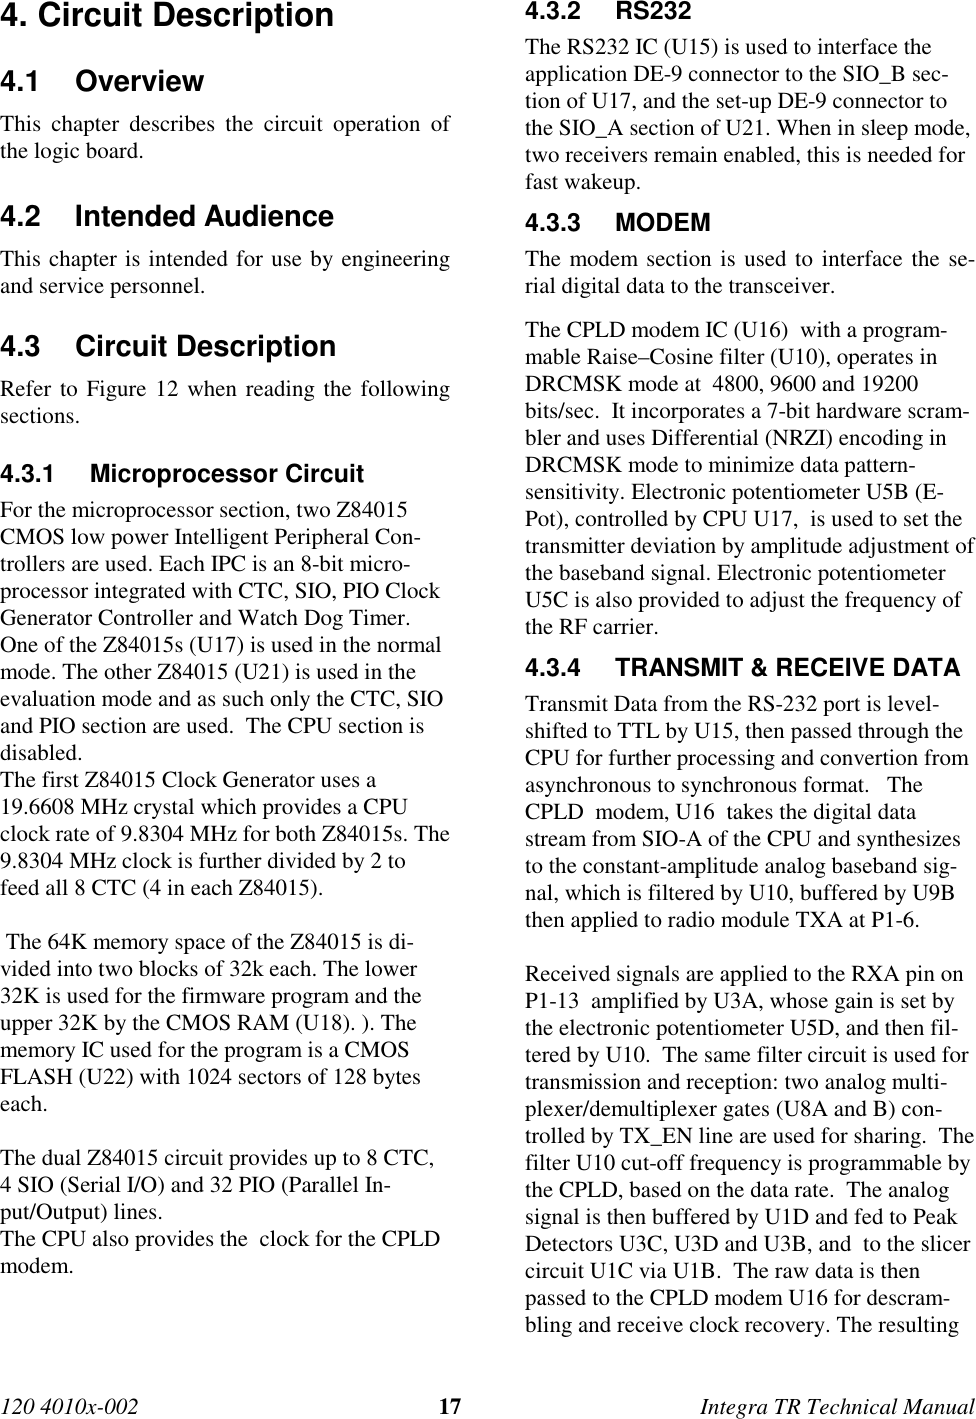 120 4010x-002 17 Integra TR Technical Manual4. Circuit Description4.1 OverviewThis chapter describes the circuit operation ofthe logic board.4.2 Intended AudienceThis chapter is intended for use by engineeringand service personnel.4.3 Circuit DescriptionRefer to Figure 12 when reading the followingsections.4.3.1 Microprocessor CircuitFor the microprocessor section, two Z84015CMOS low power Intelligent Peripheral Con-trollers are used. Each IPC is an 8-bit micro-processor integrated with CTC, SIO, PIO ClockGenerator Controller and Watch Dog Timer.One of the Z84015s (U17) is used in the normalmode. The other Z84015 (U21) is used in theevaluation mode and as such only the CTC, SIOand PIO section are used.  The CPU section isdisabled.The first Z84015 Clock Generator uses a19.6608 MHz crystal which provides a CPUclock rate of 9.8304 MHz for both Z84015s. The9.8304 MHz clock is further divided by 2 tofeed all 8 CTC (4 in each Z84015). The 64K memory space of the Z84015 is di-vided into two blocks of 32k each. The lower32K is used for the firmware program and theupper 32K by the CMOS RAM (U18). ). Thememory IC used for the program is a CMOSFLASH (U22) with 1024 sectors of 128 byteseach.The dual Z84015 circuit provides up to 8 CTC,4 SIO (Serial I/O) and 32 PIO (Parallel In-put/Output) lines.The CPU also provides the  clock for the CPLDmodem.4.3.2 RS232The RS232 IC (U15) is used to interface theapplication DE-9 connector to the SIO_B sec-tion of U17, and the set-up DE-9 connector tothe SIO_A section of U21. When in sleep mode,two receivers remain enabled, this is needed forfast wakeup.4.3.3 MODEMThe modem section is used to interface the se-rial digital data to the transceiver.The CPLD modem IC (U16)  with a program-mable Raise–Cosine filter (U10), operates inDRCMSK mode at  4800, 9600 and 19200bits/sec.  It incorporates a 7-bit hardware scram-bler and uses Differential (NRZI) encoding inDRCMSK mode to minimize data pattern-sensitivity. Electronic potentiometer U5B (E-Pot), controlled by CPU U17,  is used to set thetransmitter deviation by amplitude adjustment ofthe baseband signal. Electronic potentiometerU5C is also provided to adjust the frequency ofthe RF carrier.4.3.4  TRANSMIT &amp; RECEIVE DATATransmit Data from the RS-232 port is level-shifted to TTL by U15, then passed through theCPU for further processing and convertion fromasynchronous to synchronous format.   TheCPLD  modem, U16  takes the digital datastream from SIO-A of the CPU and synthesizesto the constant-amplitude analog baseband sig-nal, which is filtered by U10, buffered by U9Bthen applied to radio module TXA at P1-6.Received signals are applied to the RXA pin onP1-13  amplified by U3A, whose gain is set bythe electronic potentiometer U5D, and then fil-tered by U10.  The same filter circuit is used fortransmission and reception: two analog multi-plexer/demultiplexer gates (U8A and B) con-trolled by TX_EN line are used for sharing.  Thefilter U10 cut-off frequency is programmable bythe CPLD, based on the data rate.  The analogsignal is then buffered by U1D and fed to PeakDetectors U3C, U3D and U3B, and  to the slicercircuit U1C via U1B.  The raw data is thenpassed to the CPLD modem U16 for descram-bling and receive clock recovery. The resulting